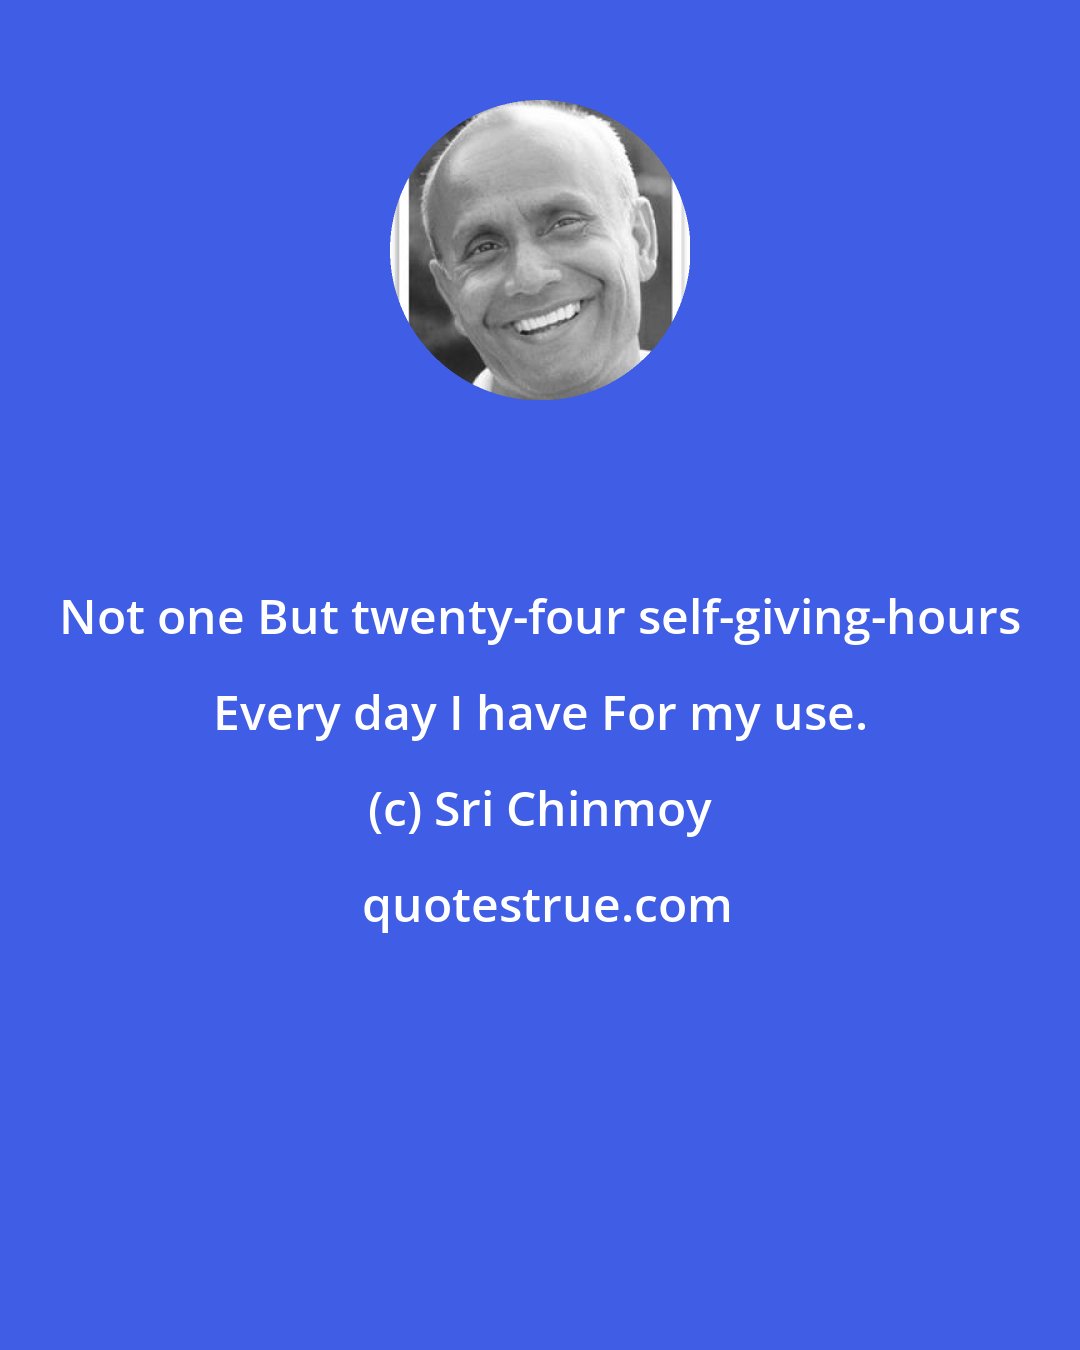 Sri Chinmoy: Not one But twenty-four self-giving-hours Every day I have For my use.